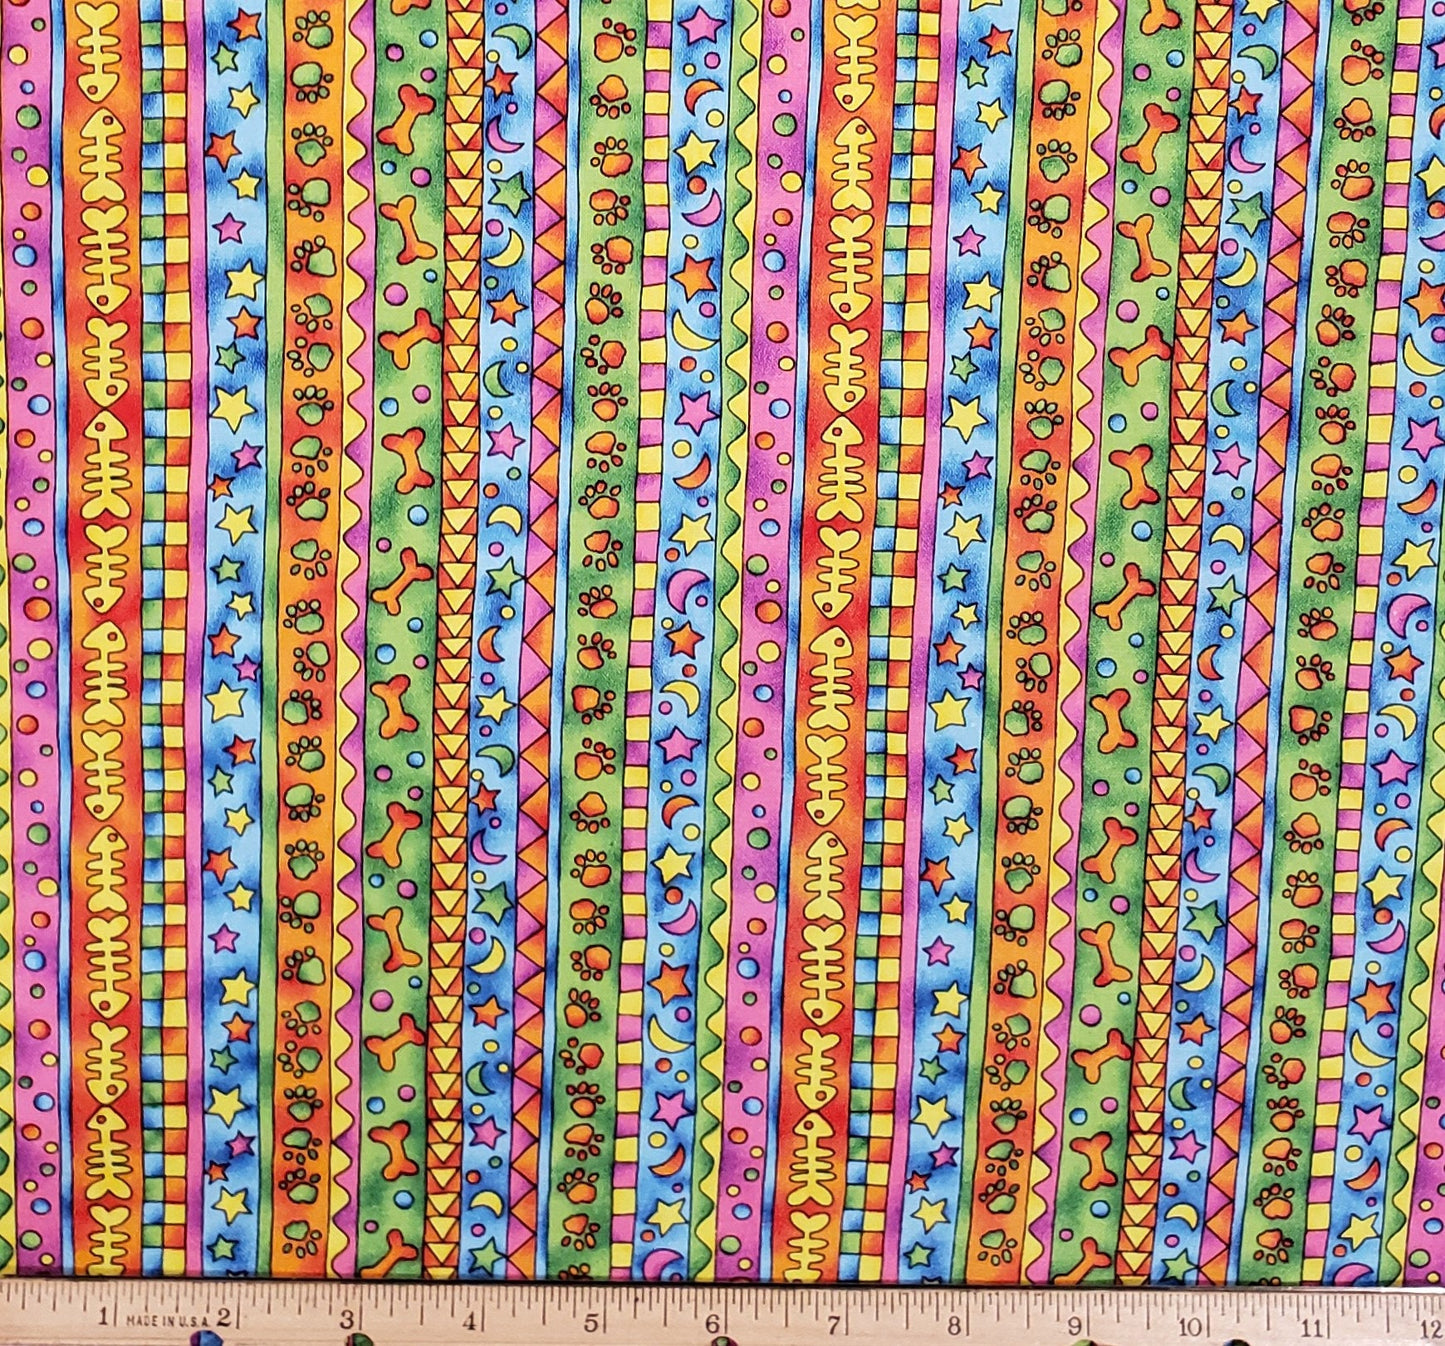 Fabric Printed Exclusively for Hobby Lobby by Tropical Trading - Brightly-Colored / Cartoon-Style Stripes